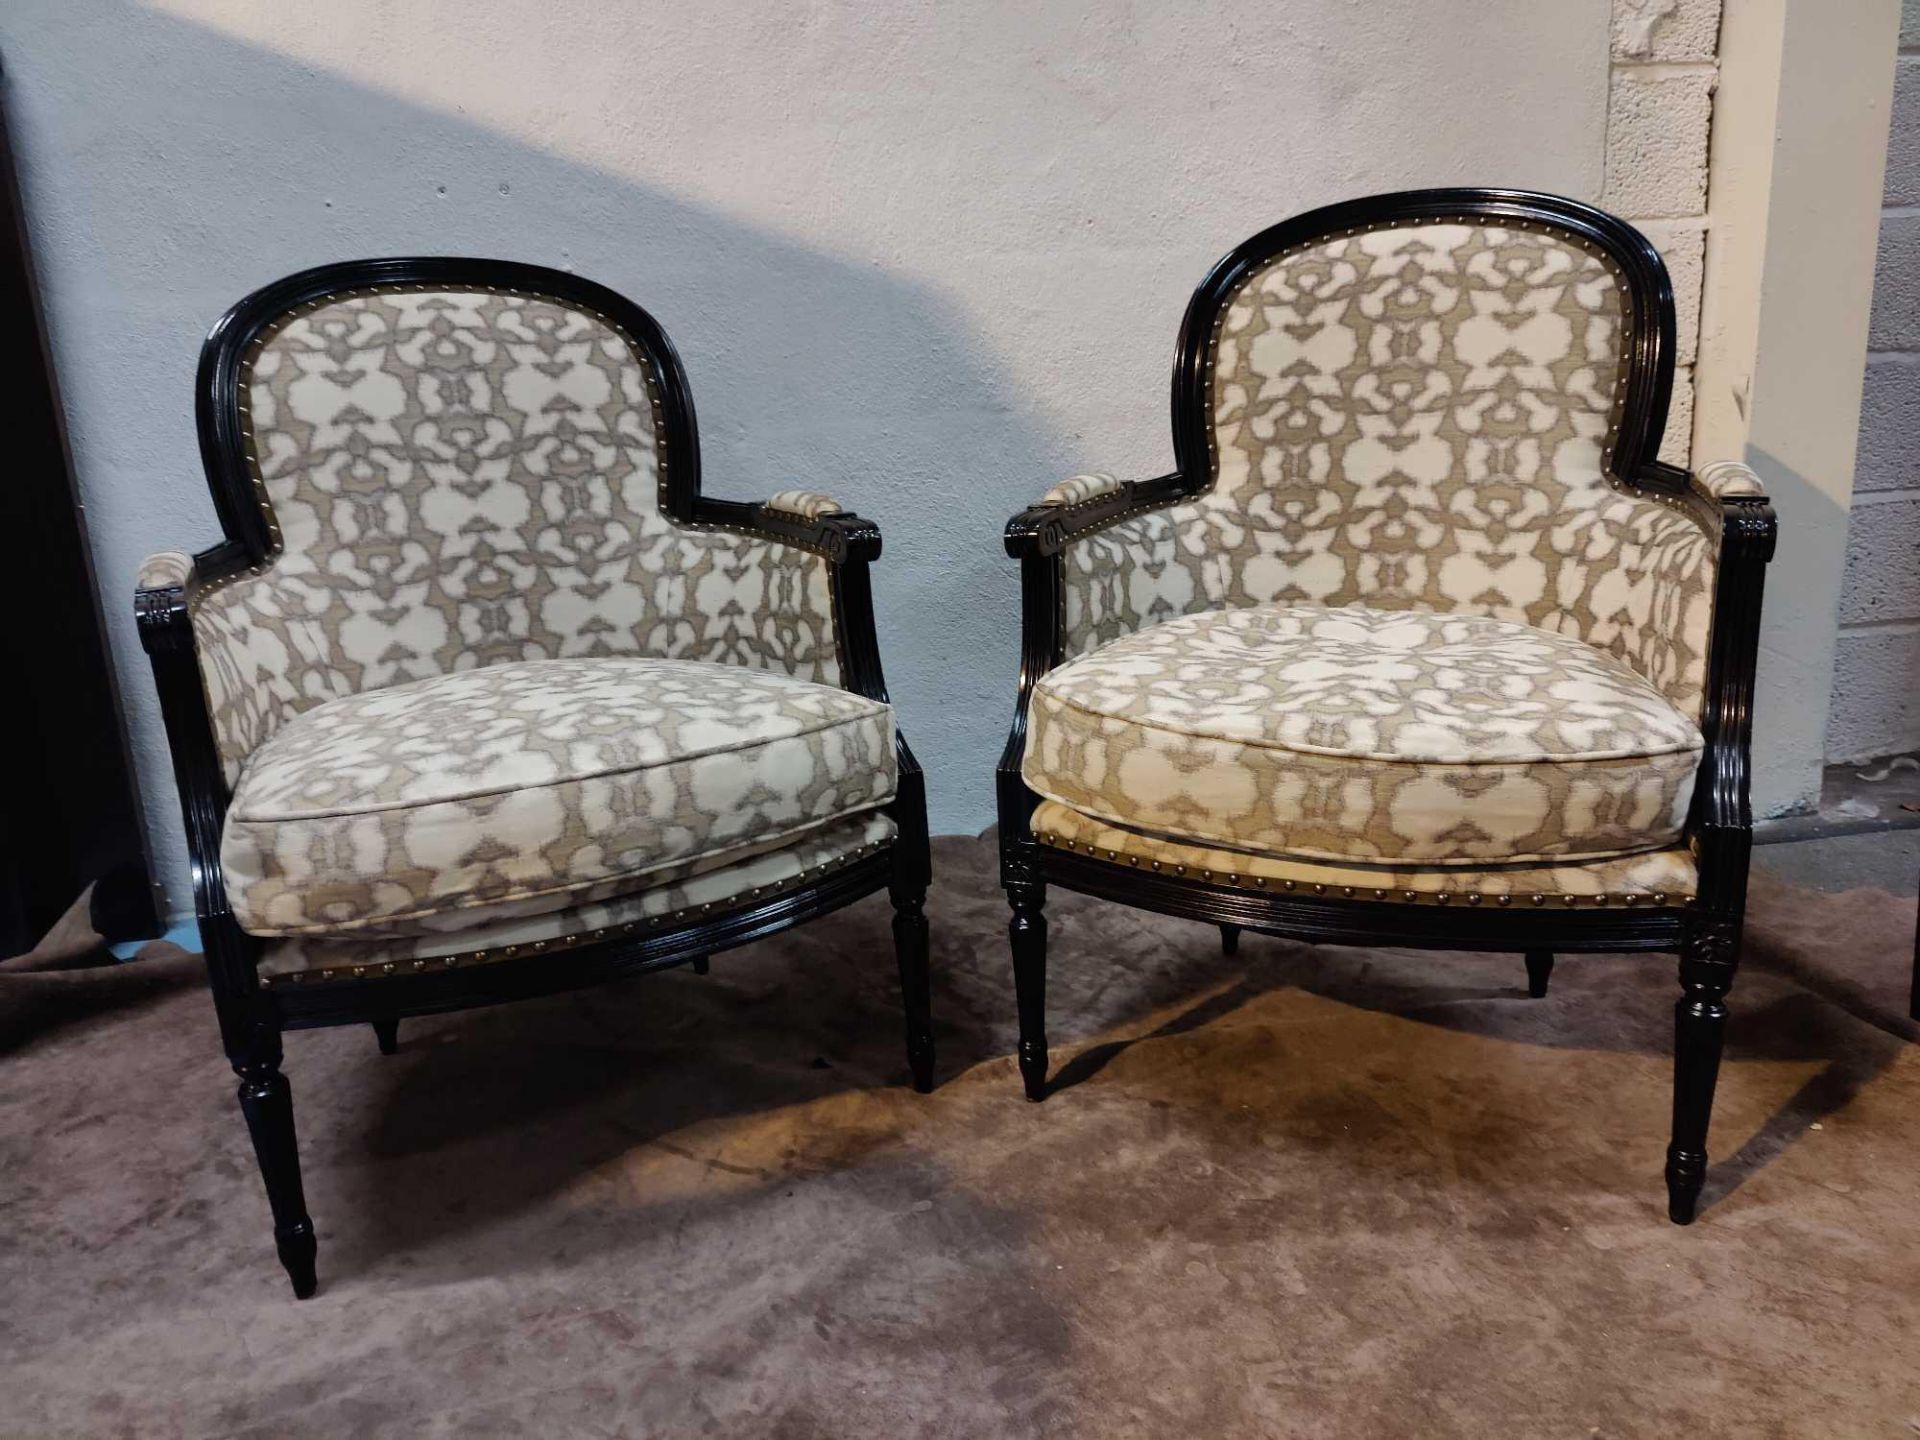 A Pair Of Bergere Chairs Black Wood Frame Upholstered In A Gold Cream Pattern With Stud Pin Detail - Image 2 of 3